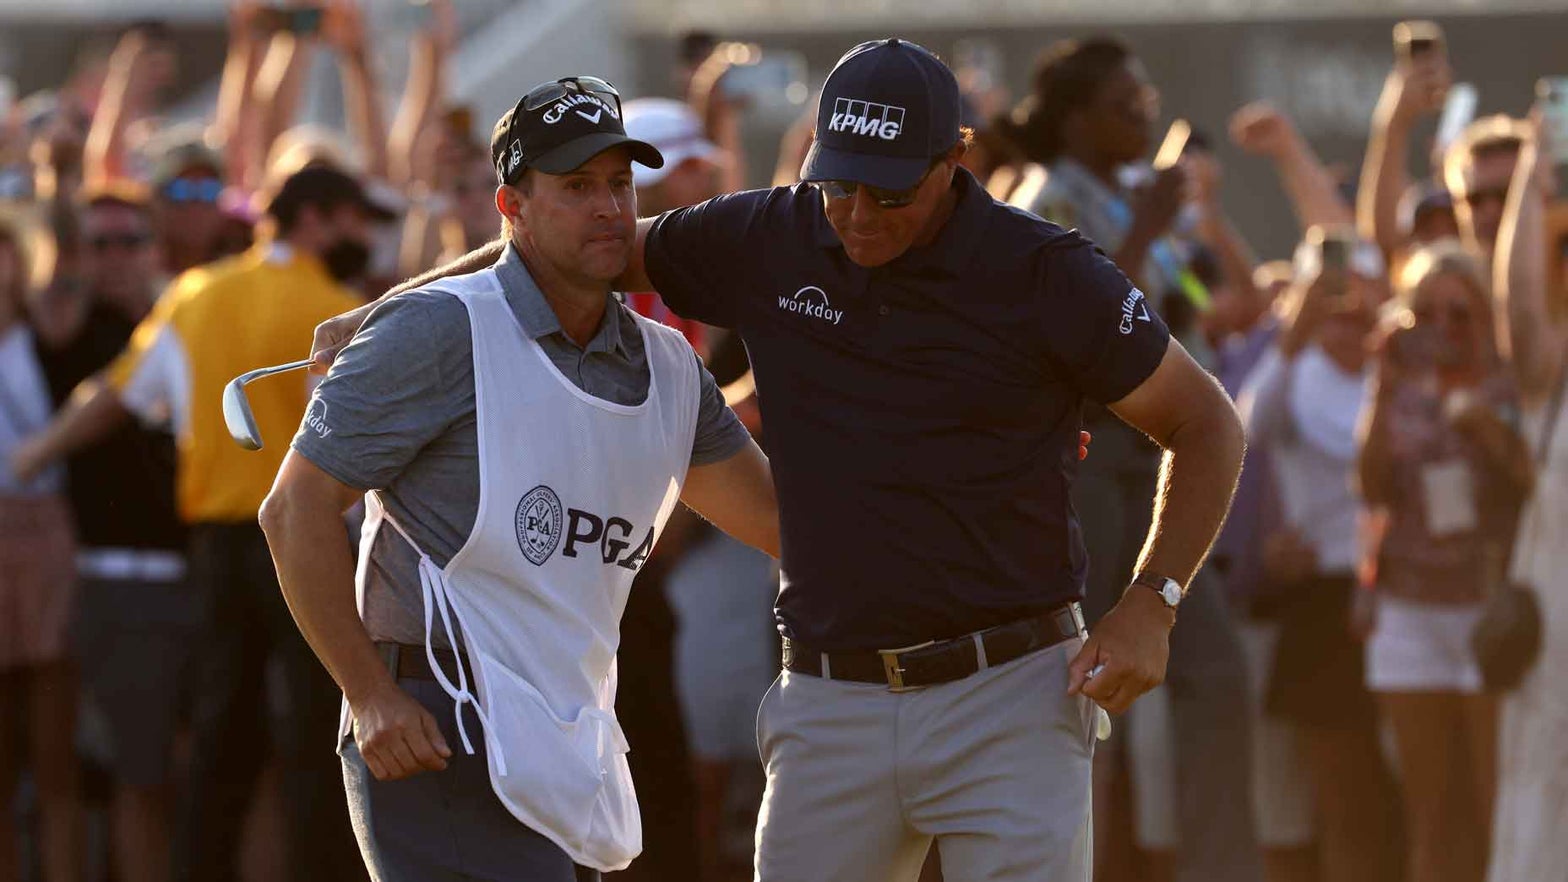 Tim Mickelson explains how he kept Phil calm down the stretch at PGA Championship